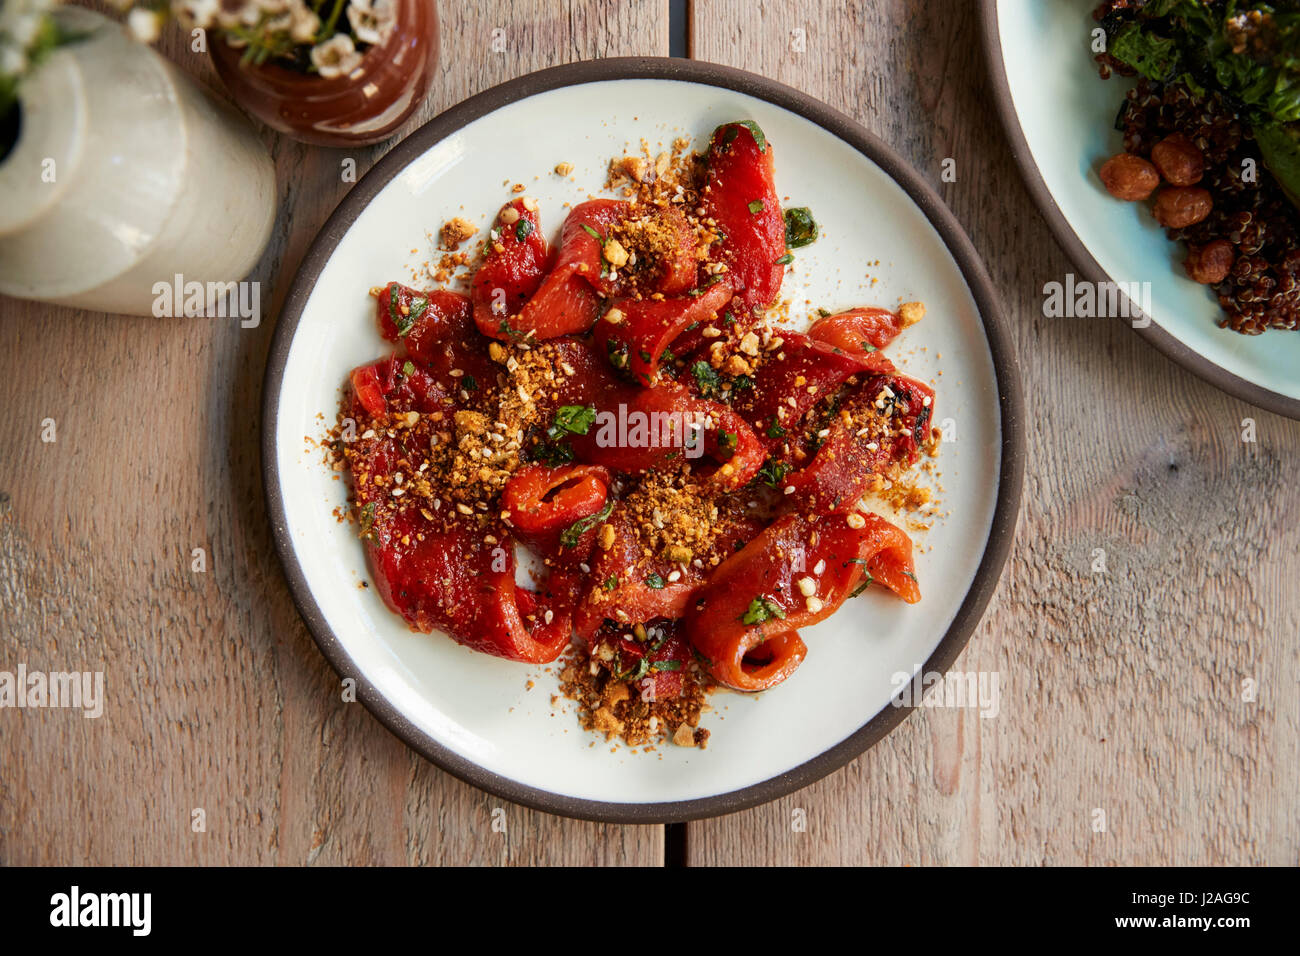 Marinated, flamed peppers with dukkah spices, overhead view Stock Photo